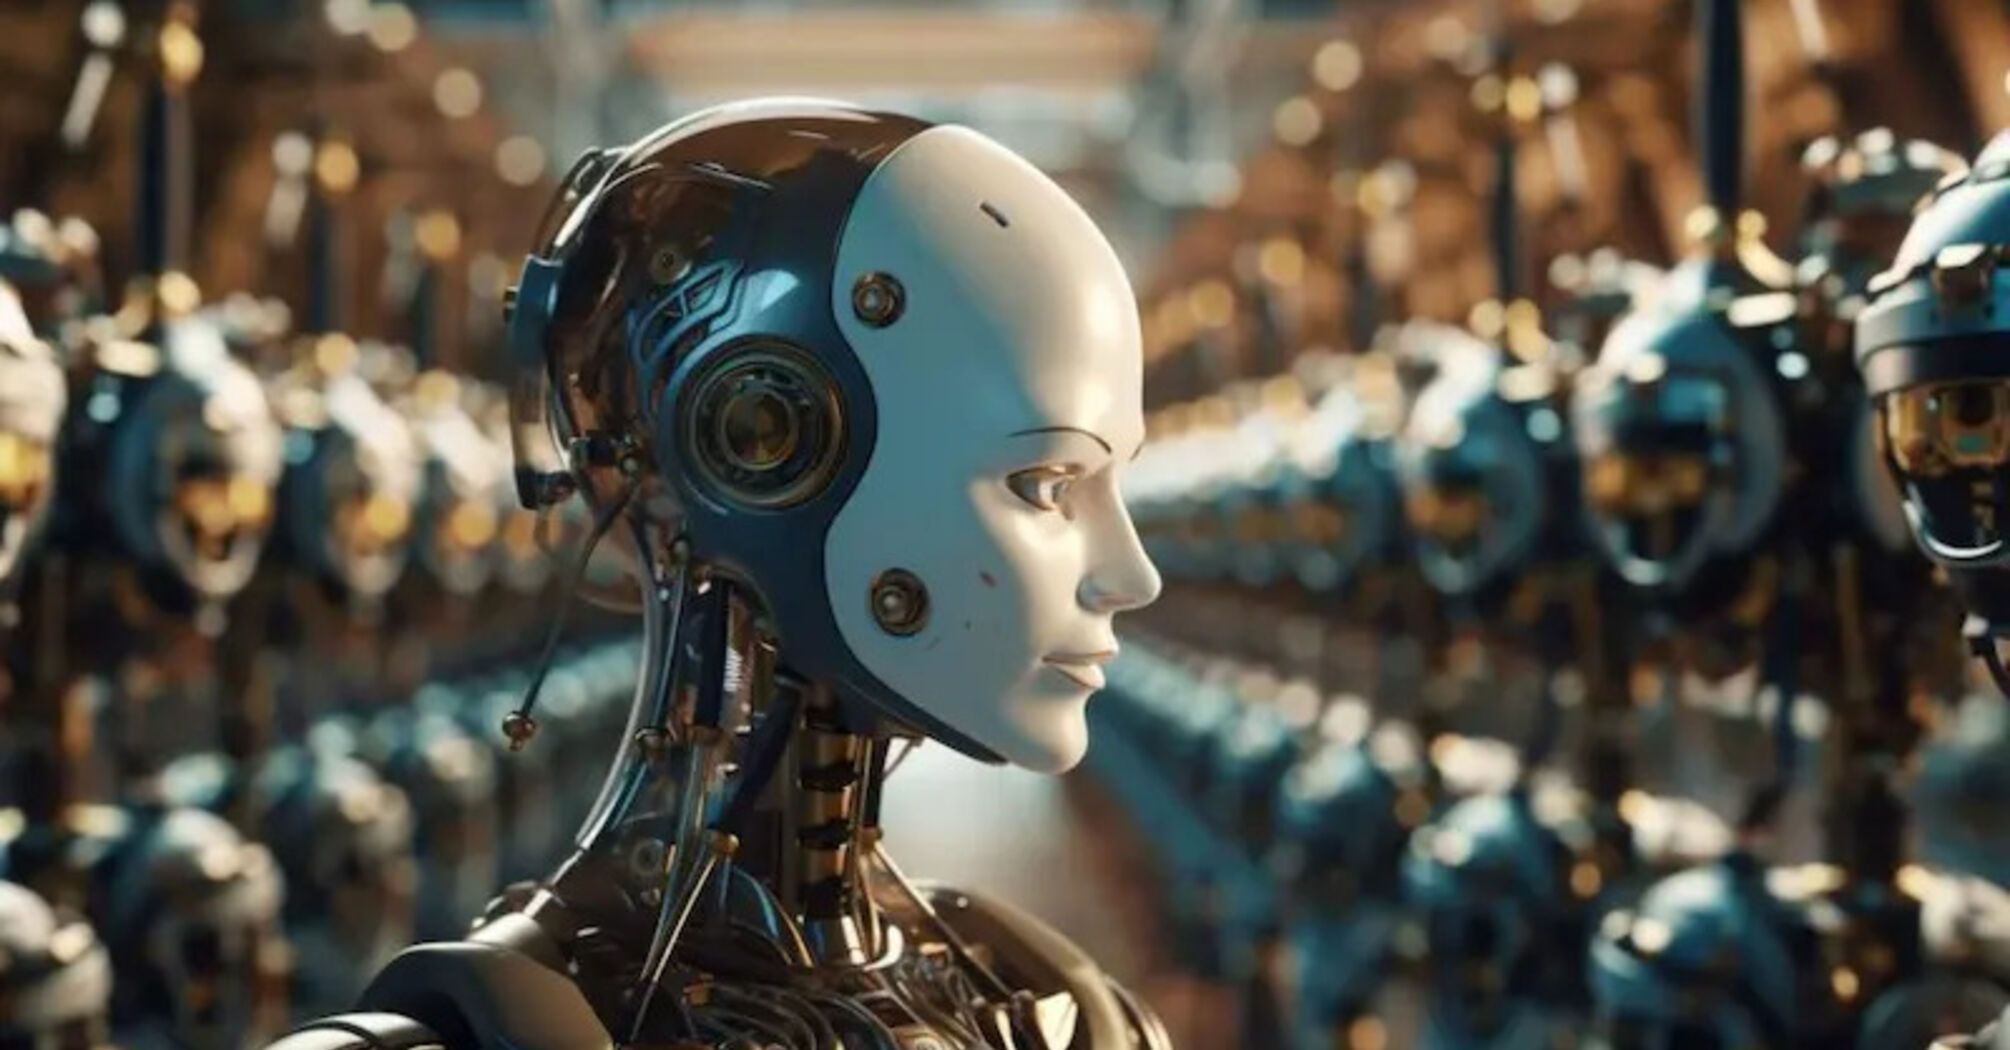 5 fascinating facts about robotics